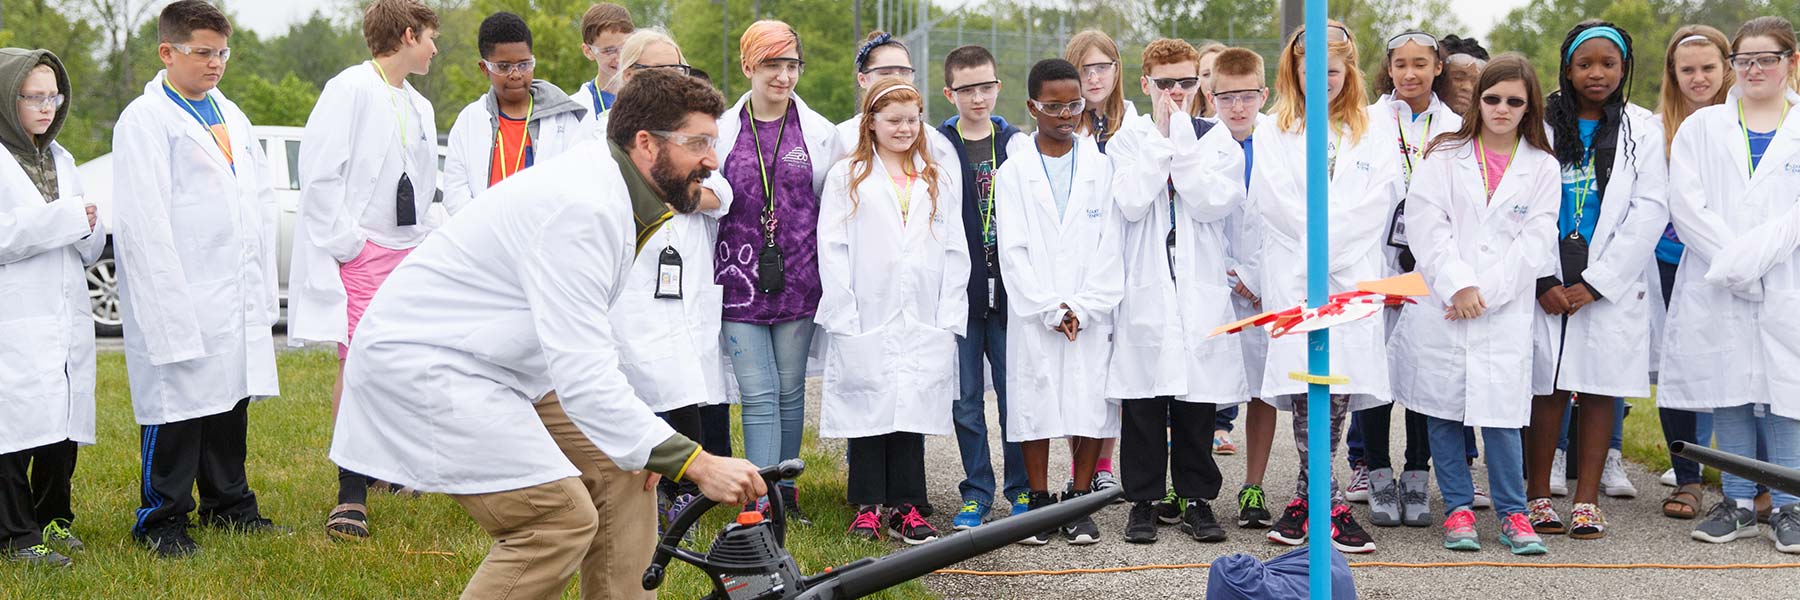 A scientist in a white lab coat performs an experiment for children.